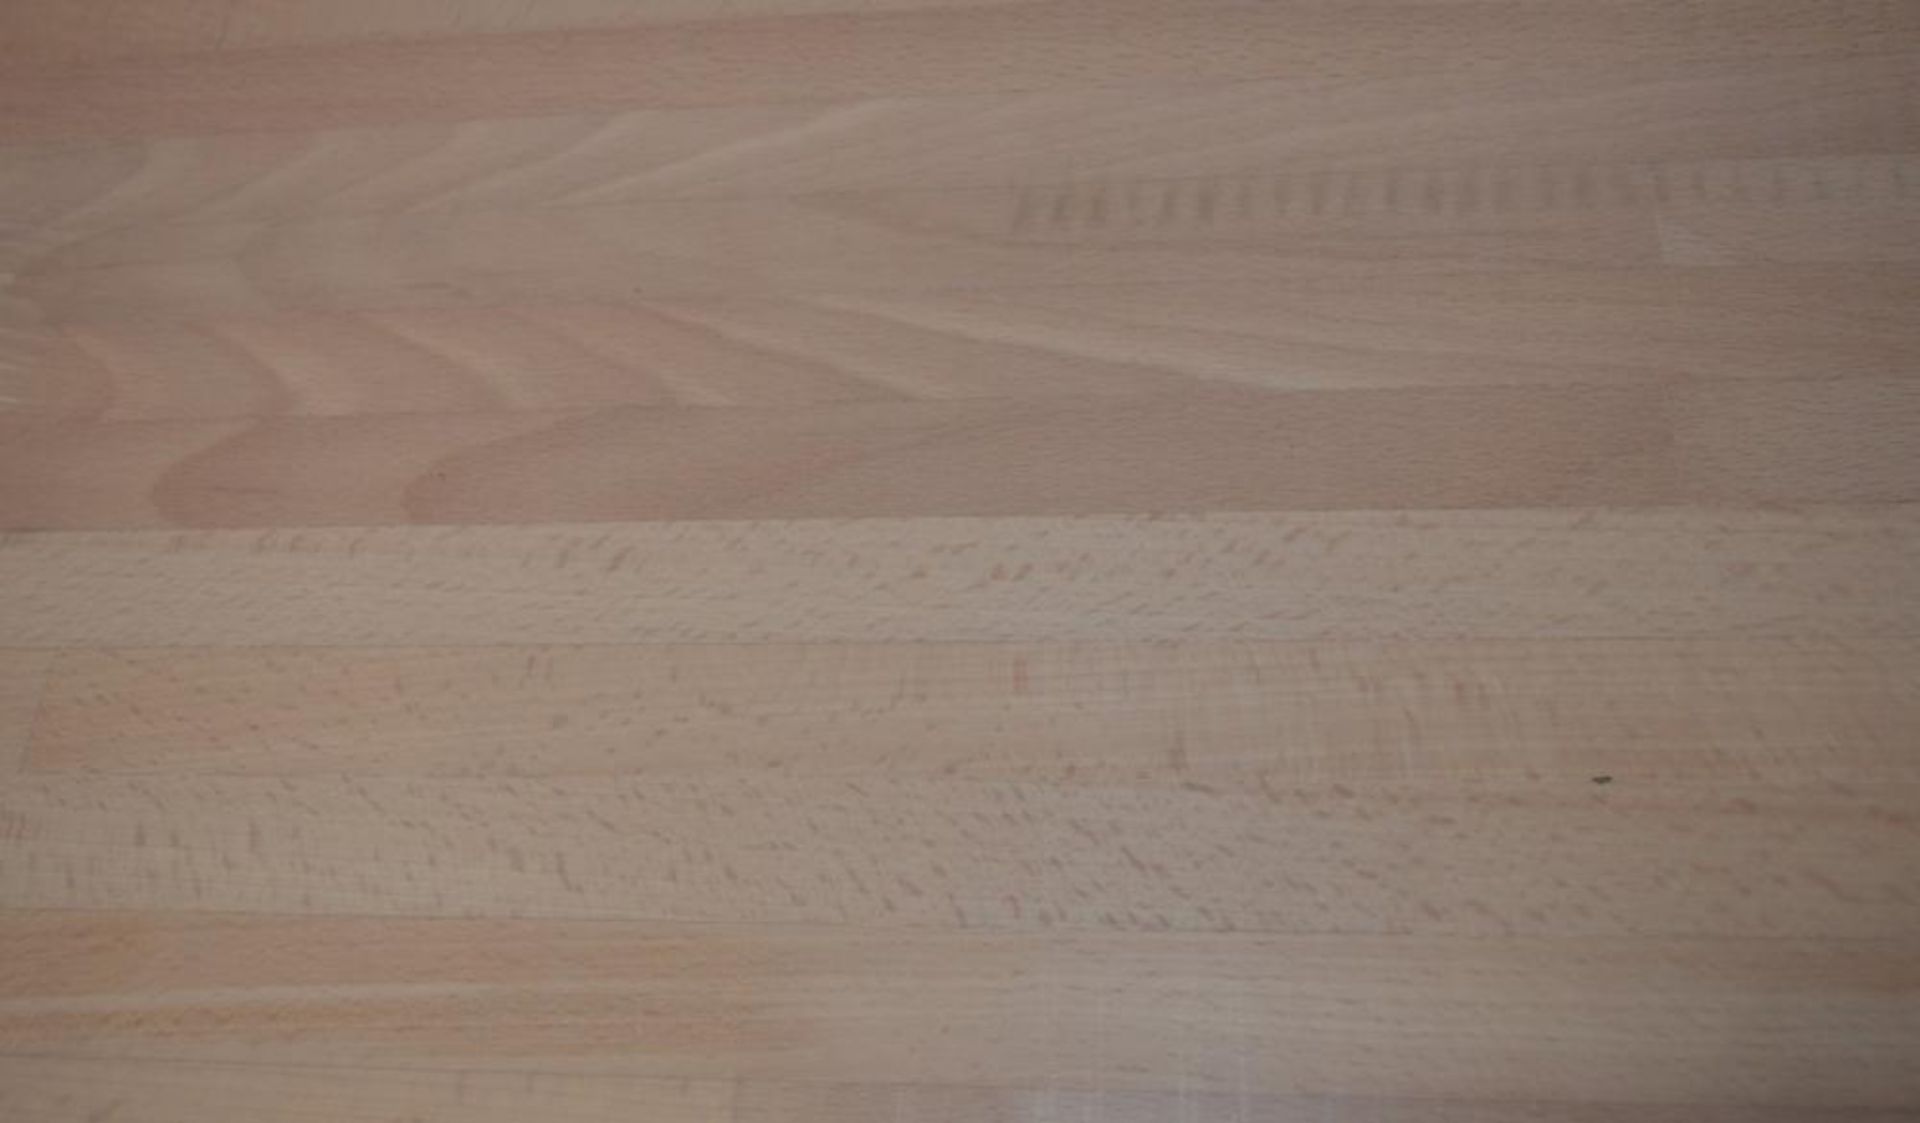 4 x Solid Wood Kitchen Worktops - PRIME BEECH - First Grade Finger Jointed Kitchen Worktops - Size: - Image 3 of 3